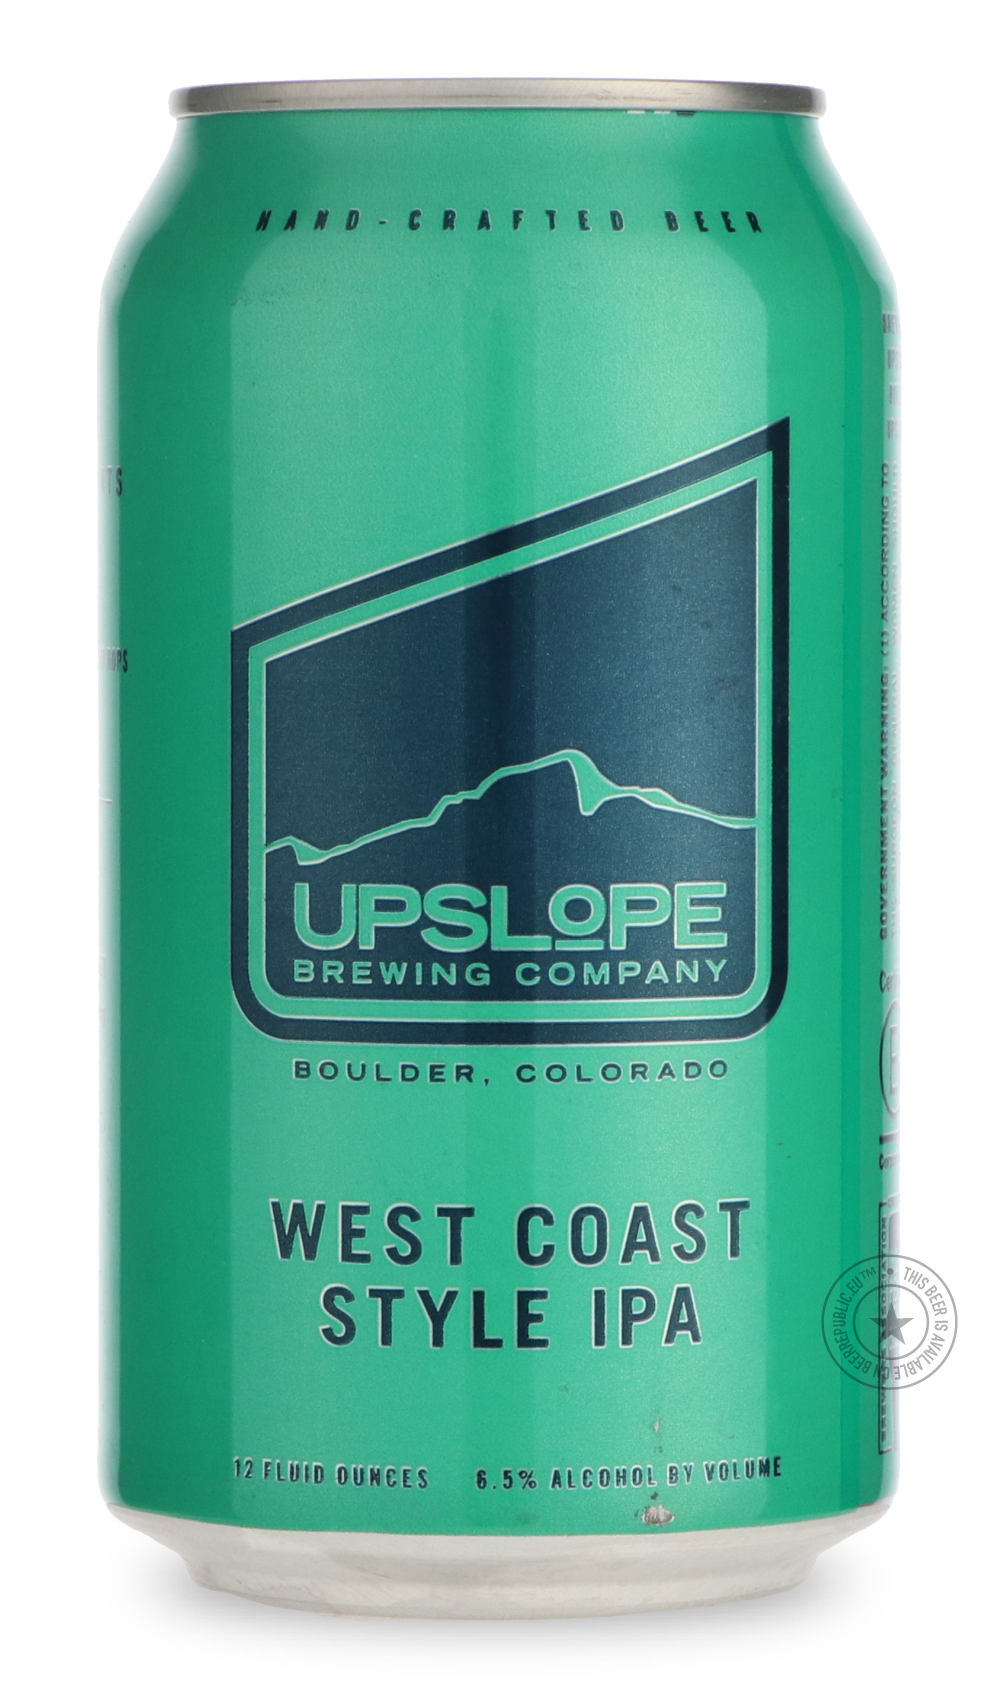 -Upslope- West Coast Style IPA-IPA- Only @ Beer Republic - The best online beer store for American & Canadian craft beer - Buy beer online from the USA and Canada - Bier online kopen - Amerikaans bier kopen - Craft beer store - Craft beer kopen - Amerikanisch bier kaufen - Bier online kaufen - Acheter biere online - IPA - Stout - Porter - New England IPA - Hazy IPA - Imperial Stout - Barrel Aged - Barrel Aged Imperial Stout - Brown - Dark beer - Blond - Blonde - Pilsner - Lager - Wheat - Weizen - Amber - Ba